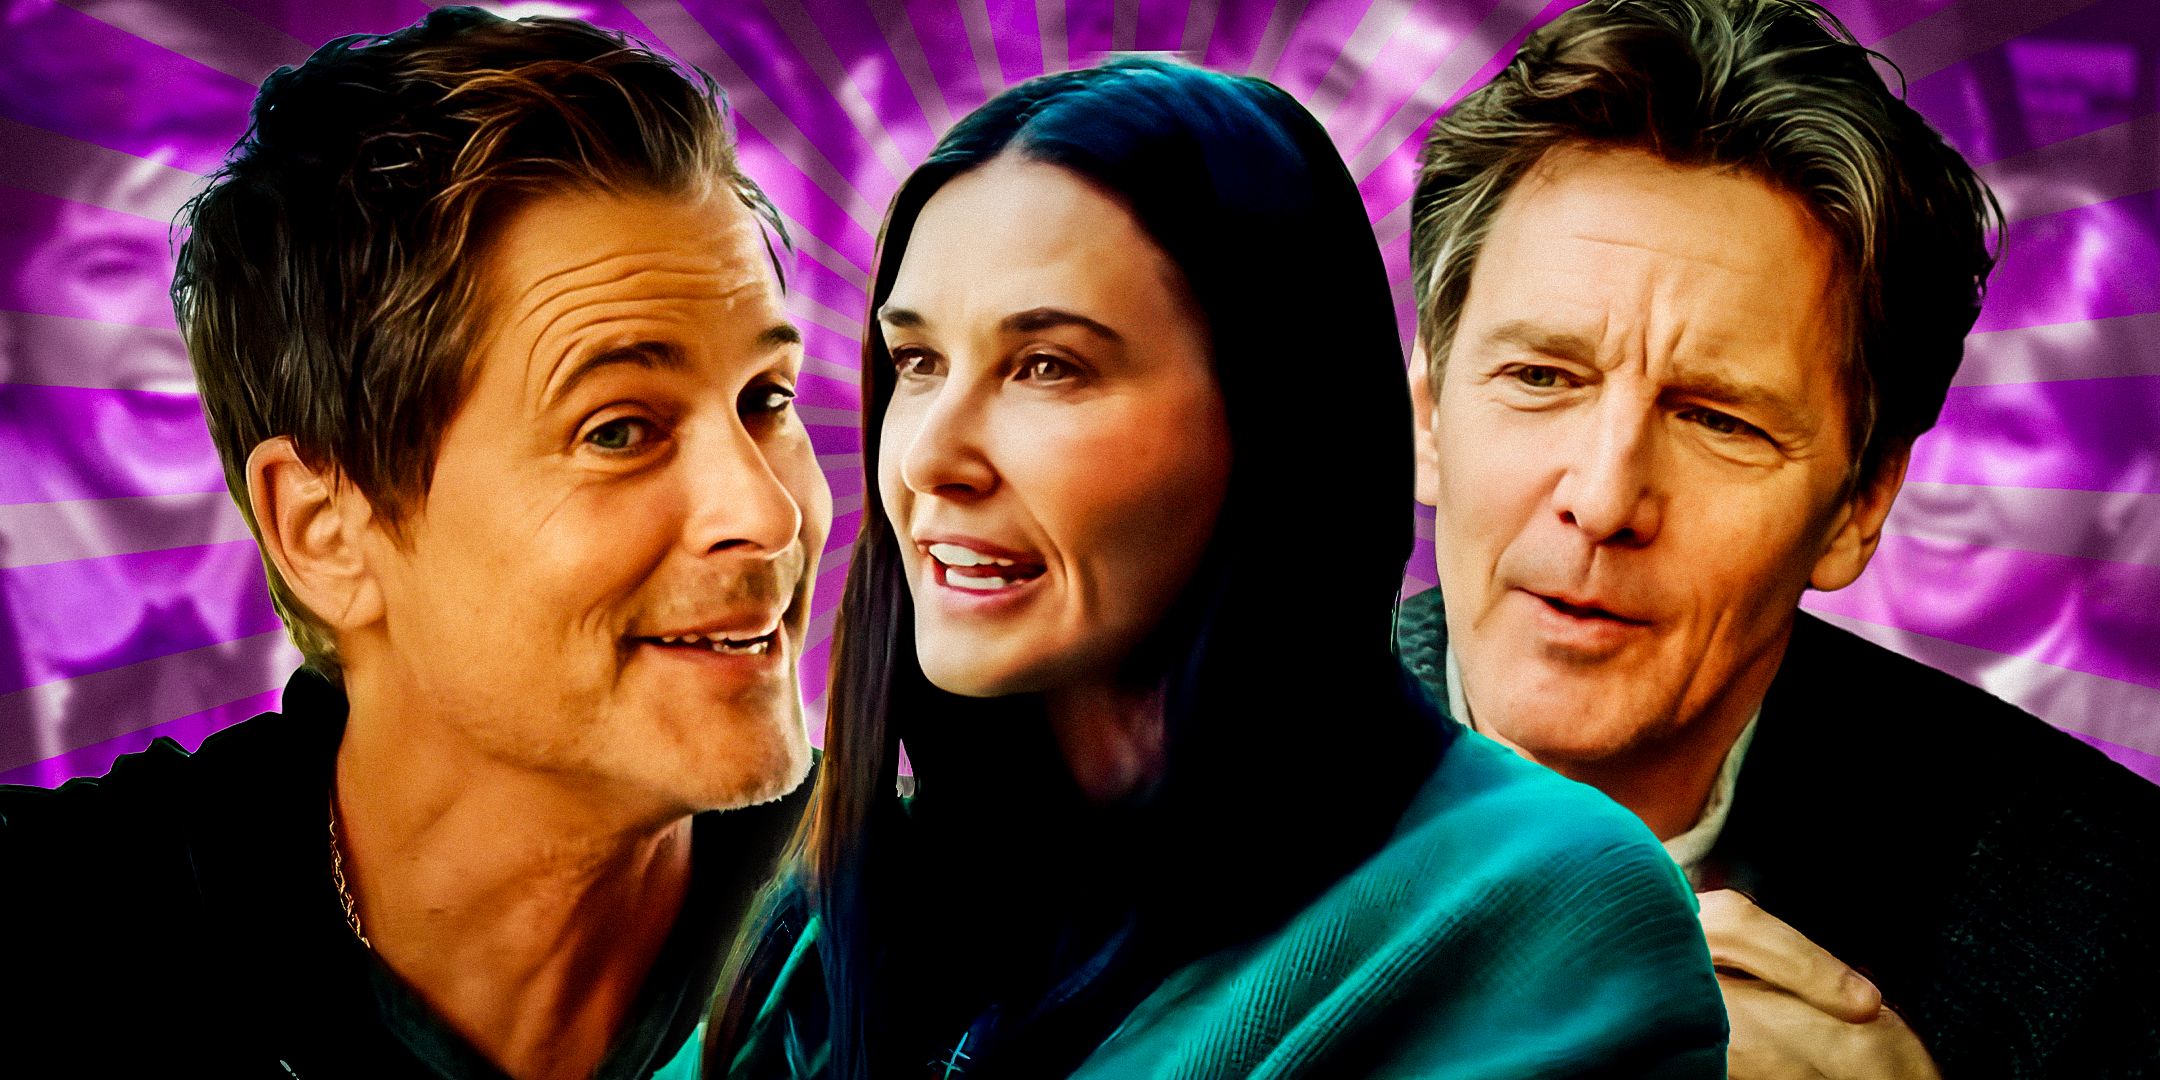 Andrew-McCarthy-Rob-Lowe-and-Demi-Moore-from-Brats